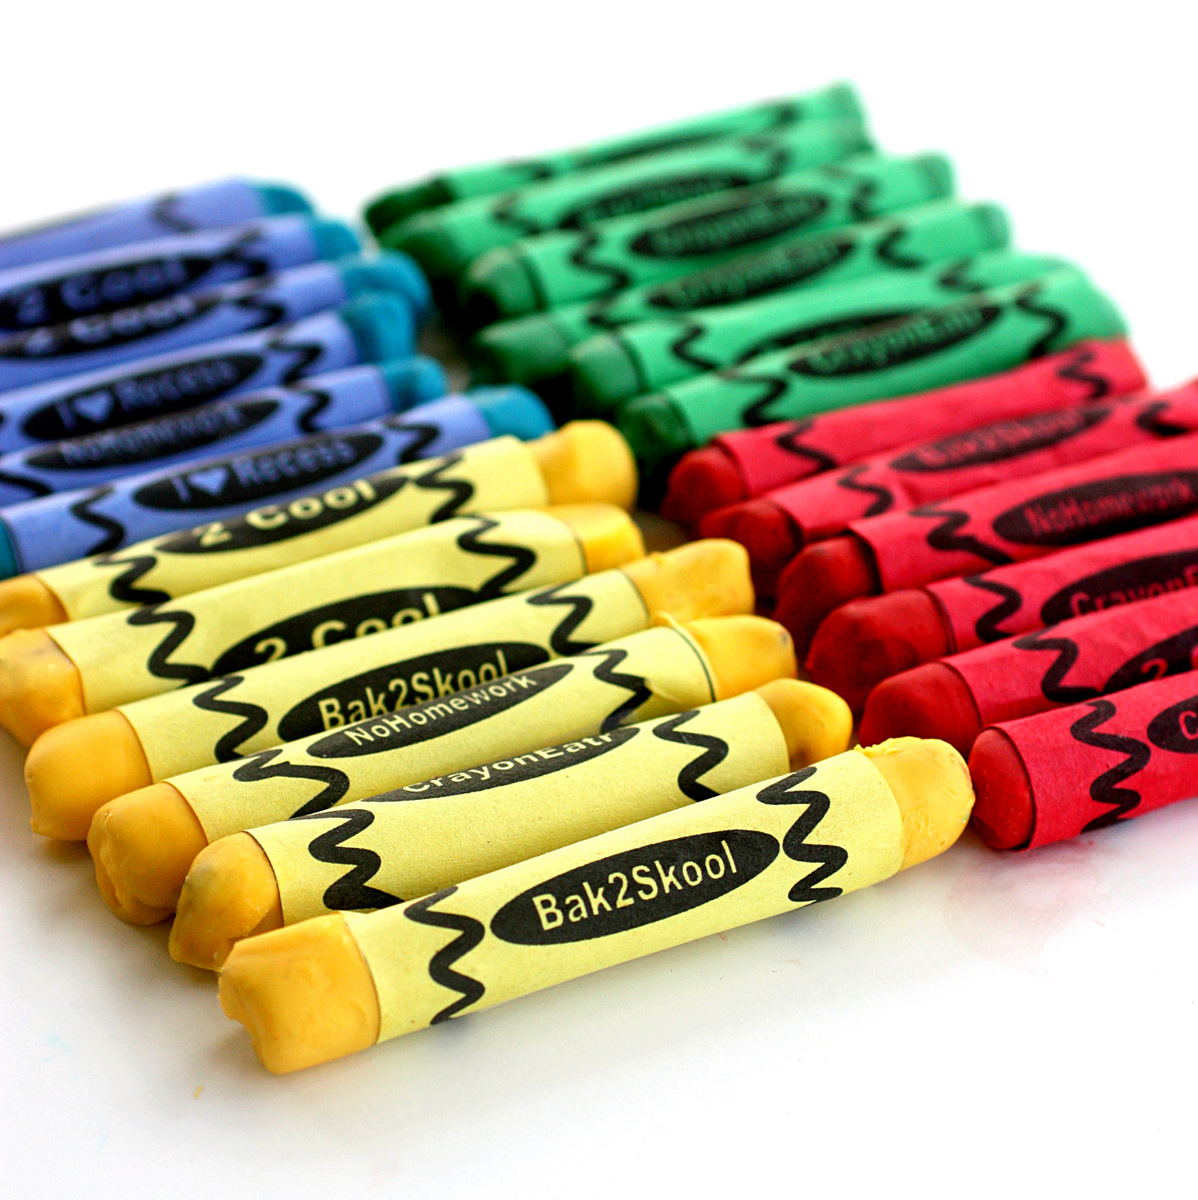 Edible Crayons Is Just What You and Your Child Need